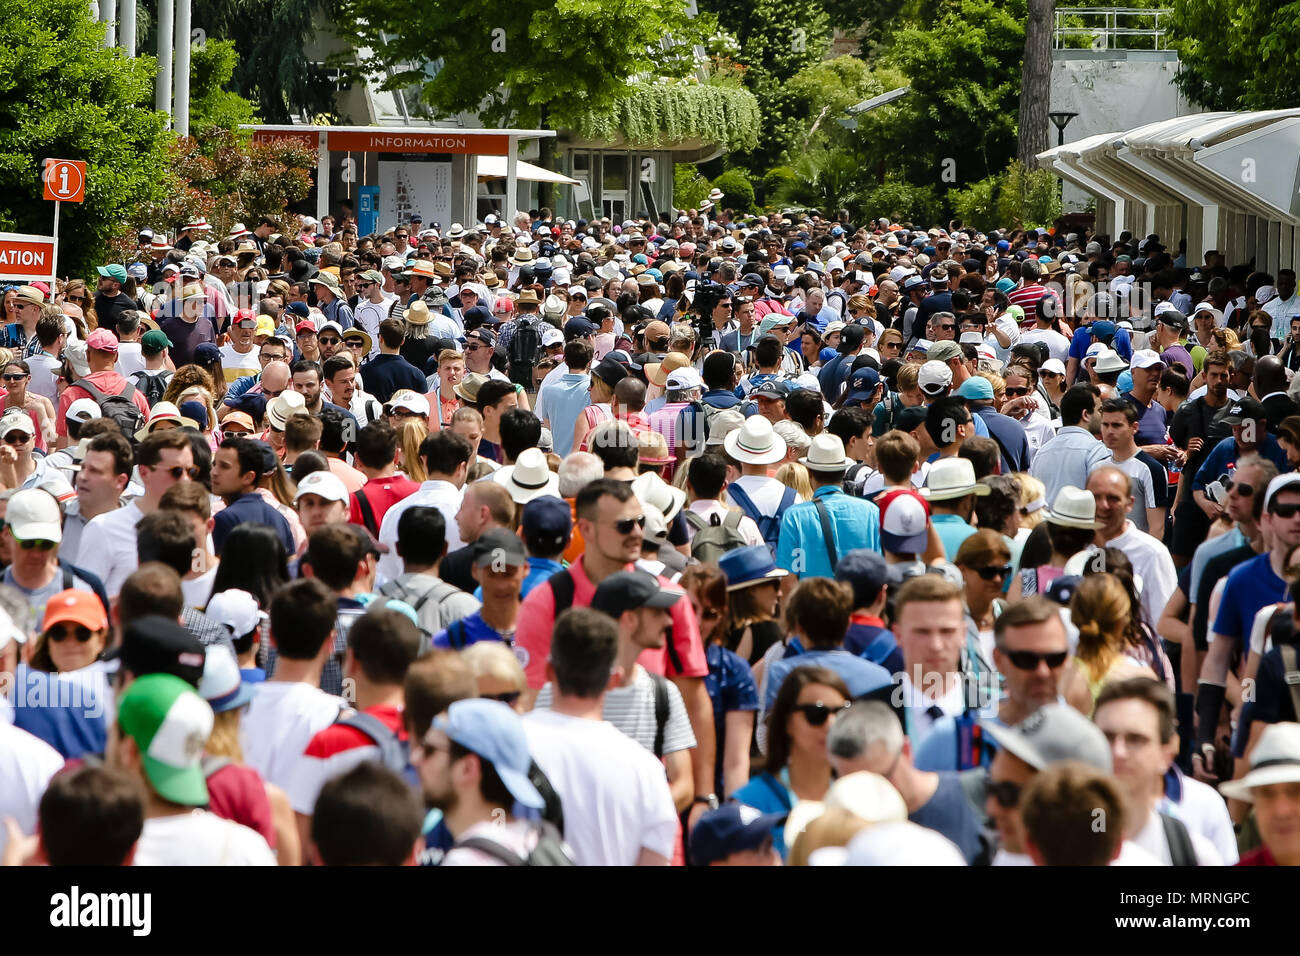 Paris, France. 27th May, 2018. A big crowd of tennis fans walk through the Roland Garros venue during Day 1 at the 2018 French Open at Roland Garros. Credit: Frank Molter/Alamy Live News Stock Photo